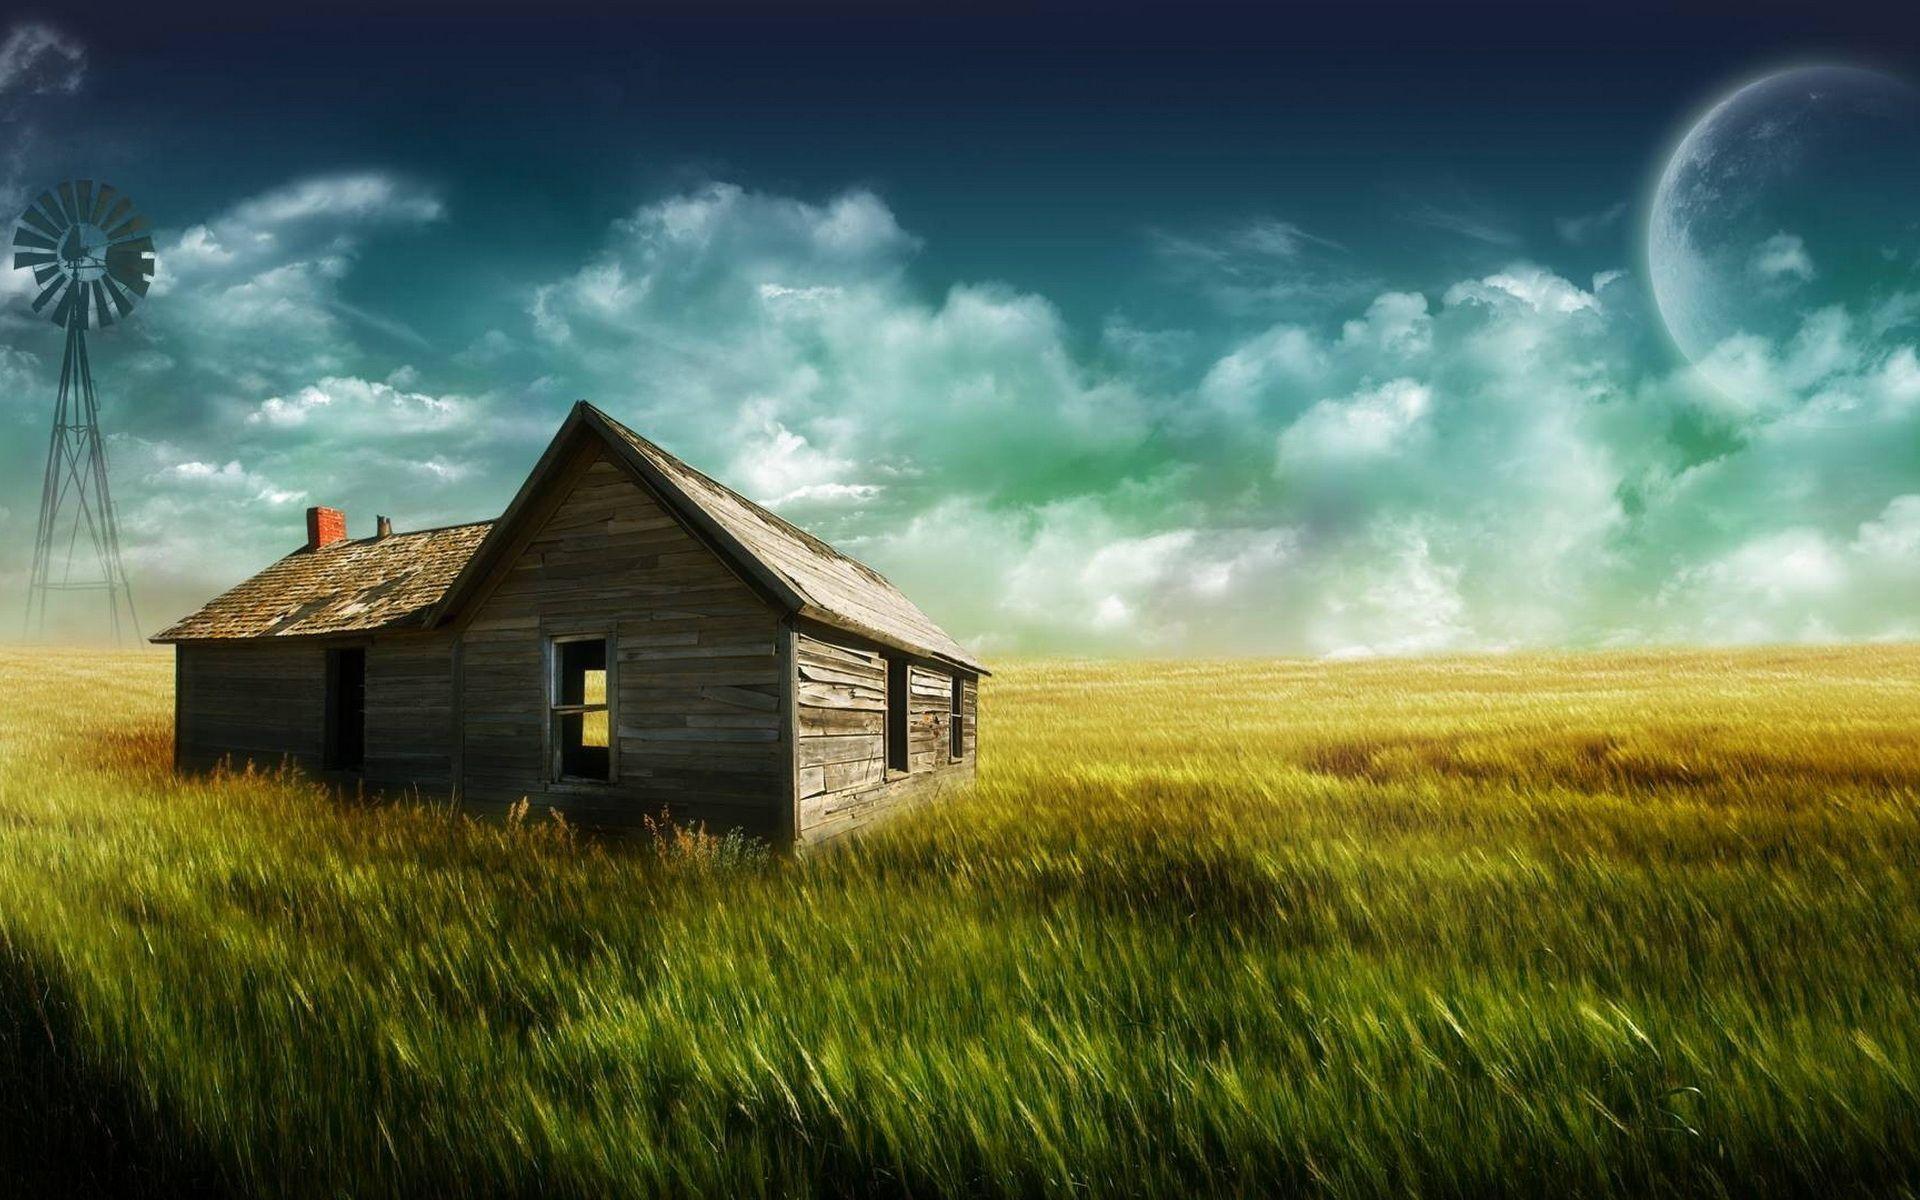 Old house in field wallpaper and image, picture